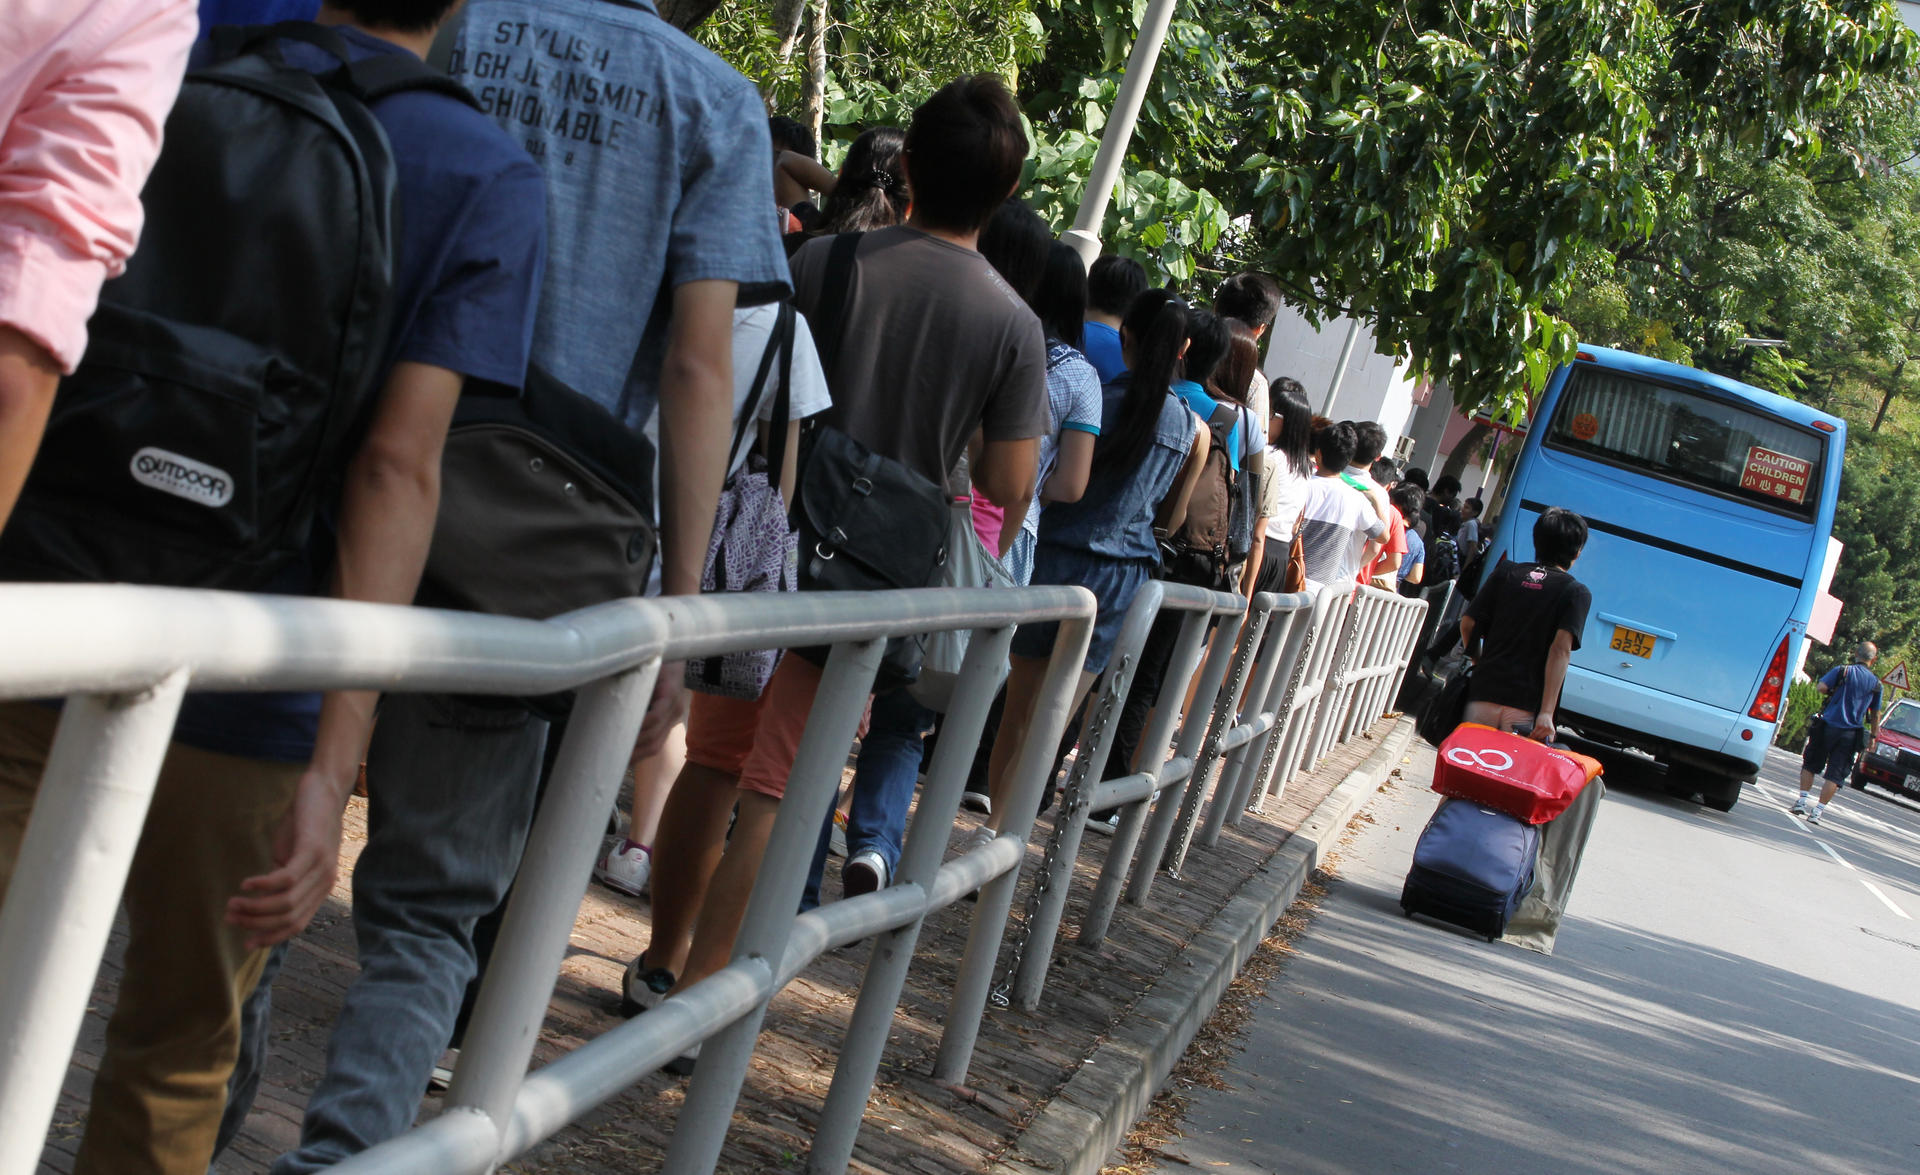 Students making their way to Chinese University queue for a shuttle bus near the University MTR station during a hectic first day of the academic year yesterday. Photo: Nora Tam